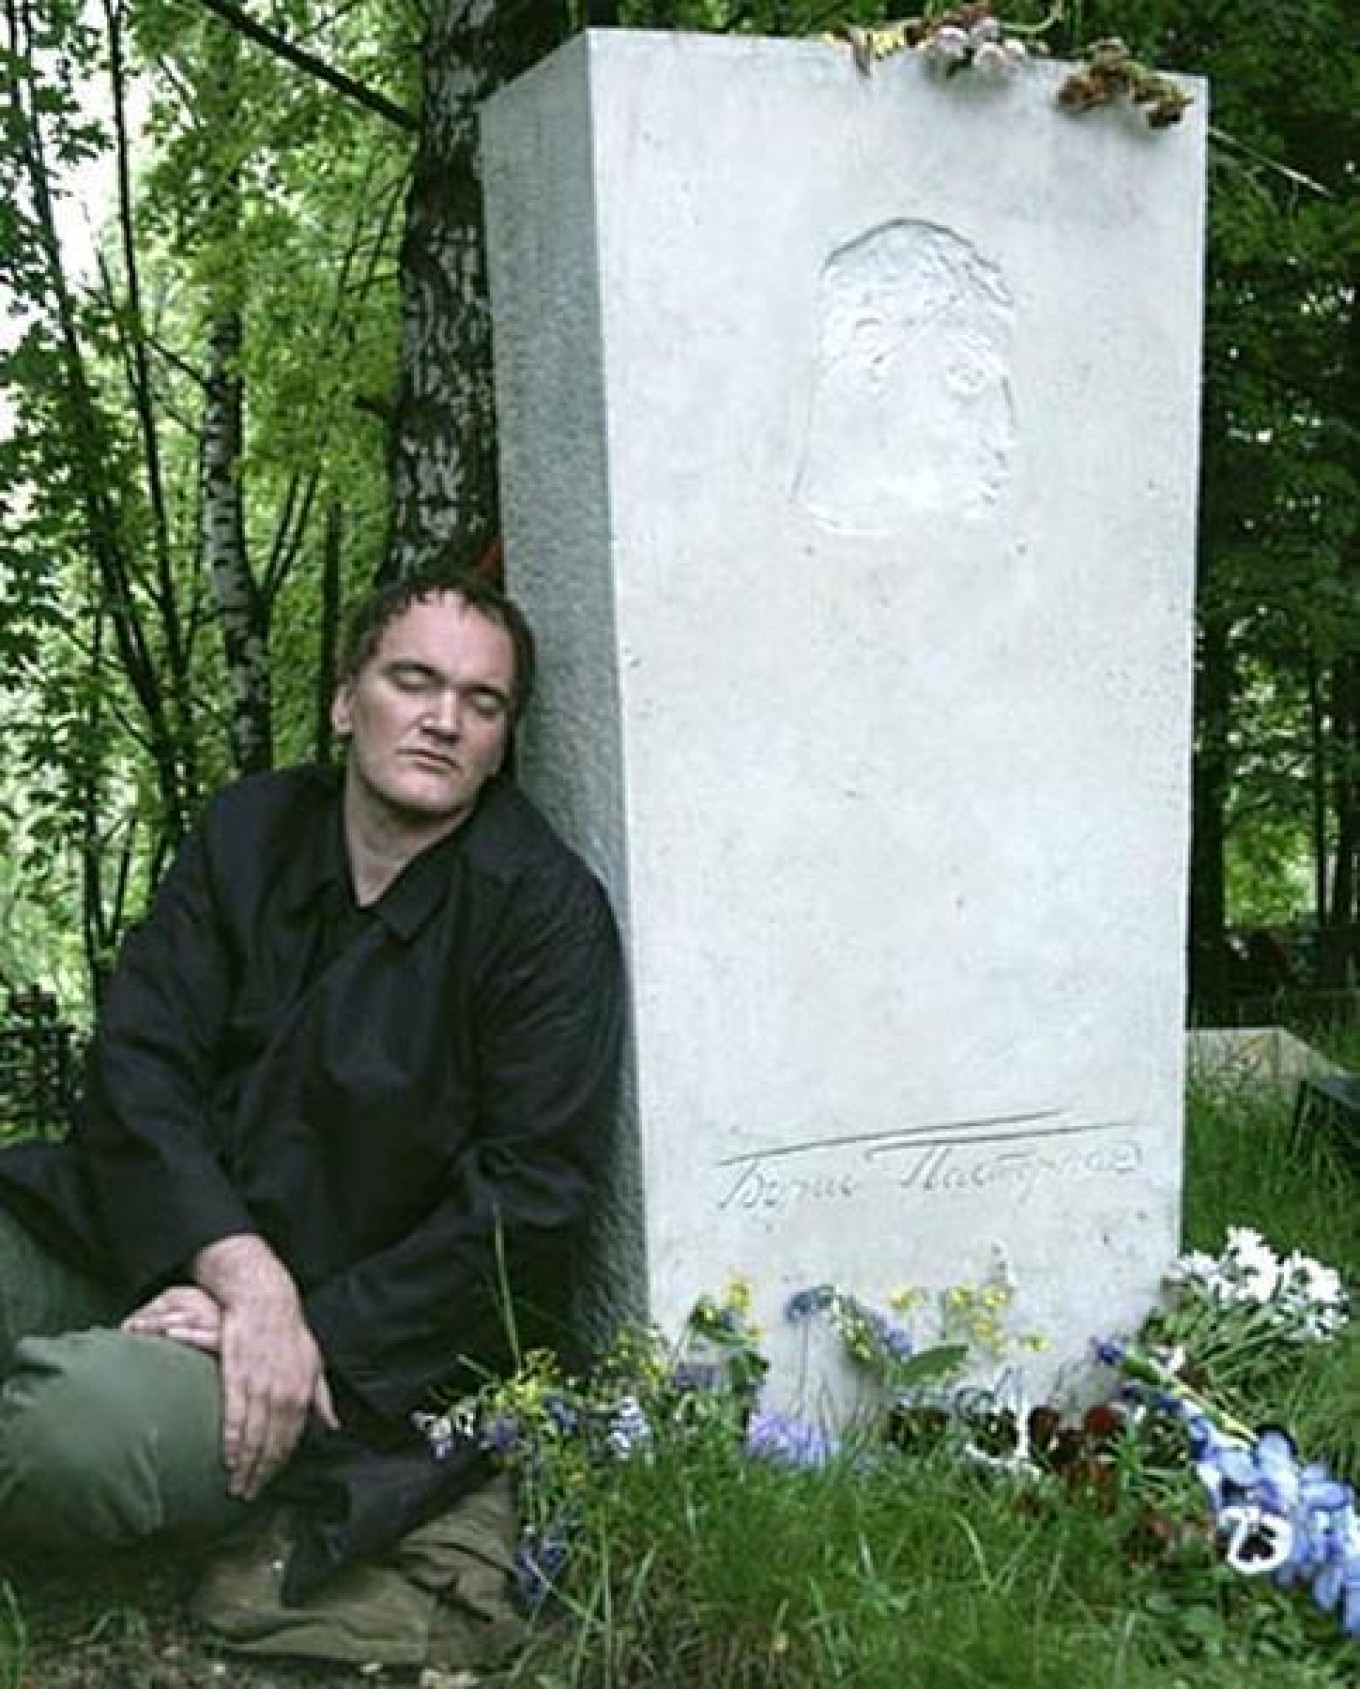 
					Tarantino visited Pasternak's grave at Moscow's Peredelkino cemetery in 2004 while visiting Russia for the 26th Moscow Film Festival.					 					Twitter / literaturarussa				